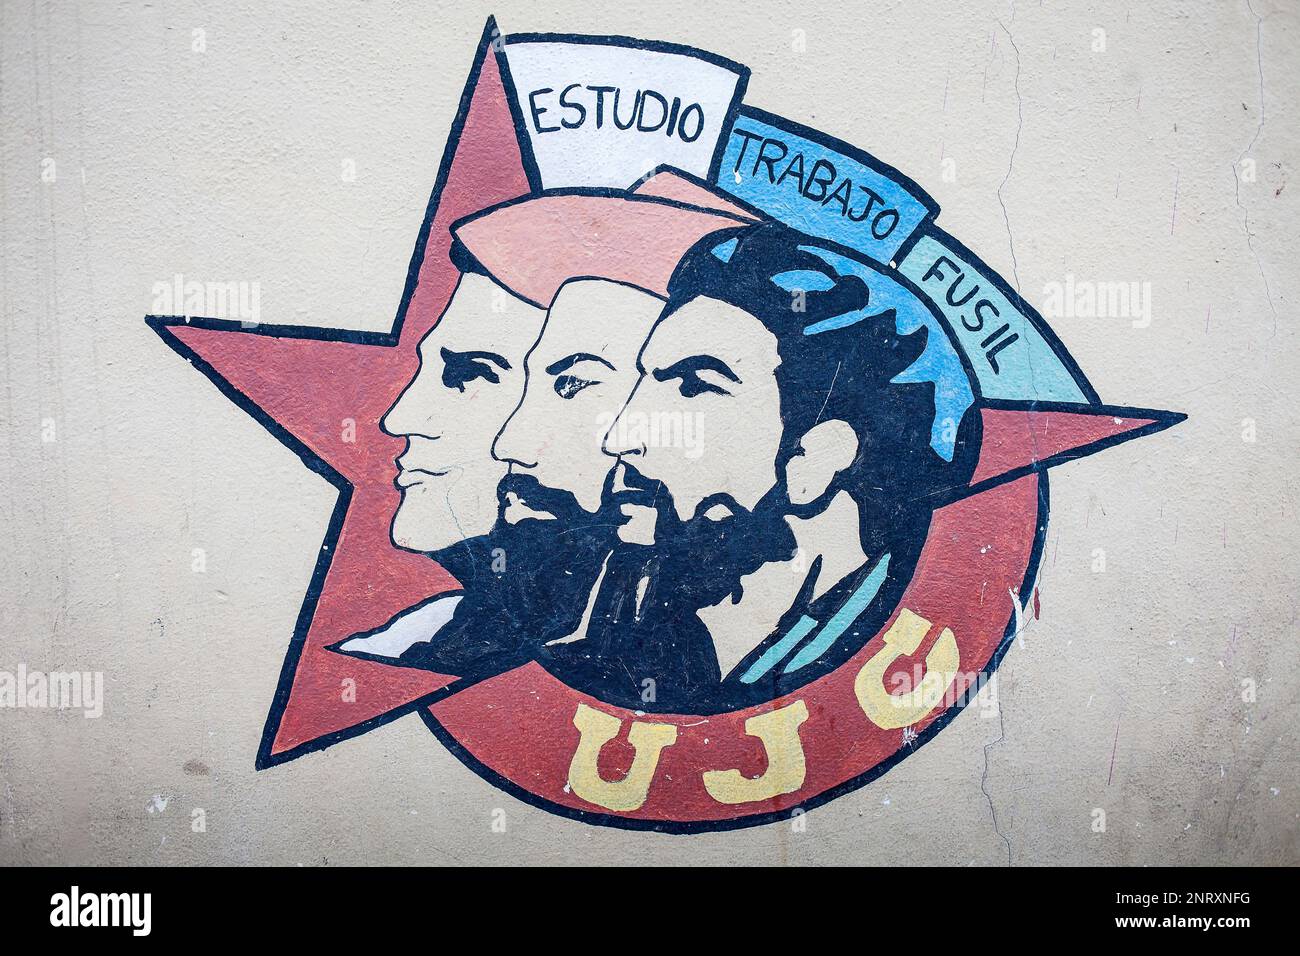 Political propaganda. Emblem of UJC, Union of Young Communists, faces of Mella, Cienfuegos y Che, painted on a street wall, La Habana, Cuba Stock Photo